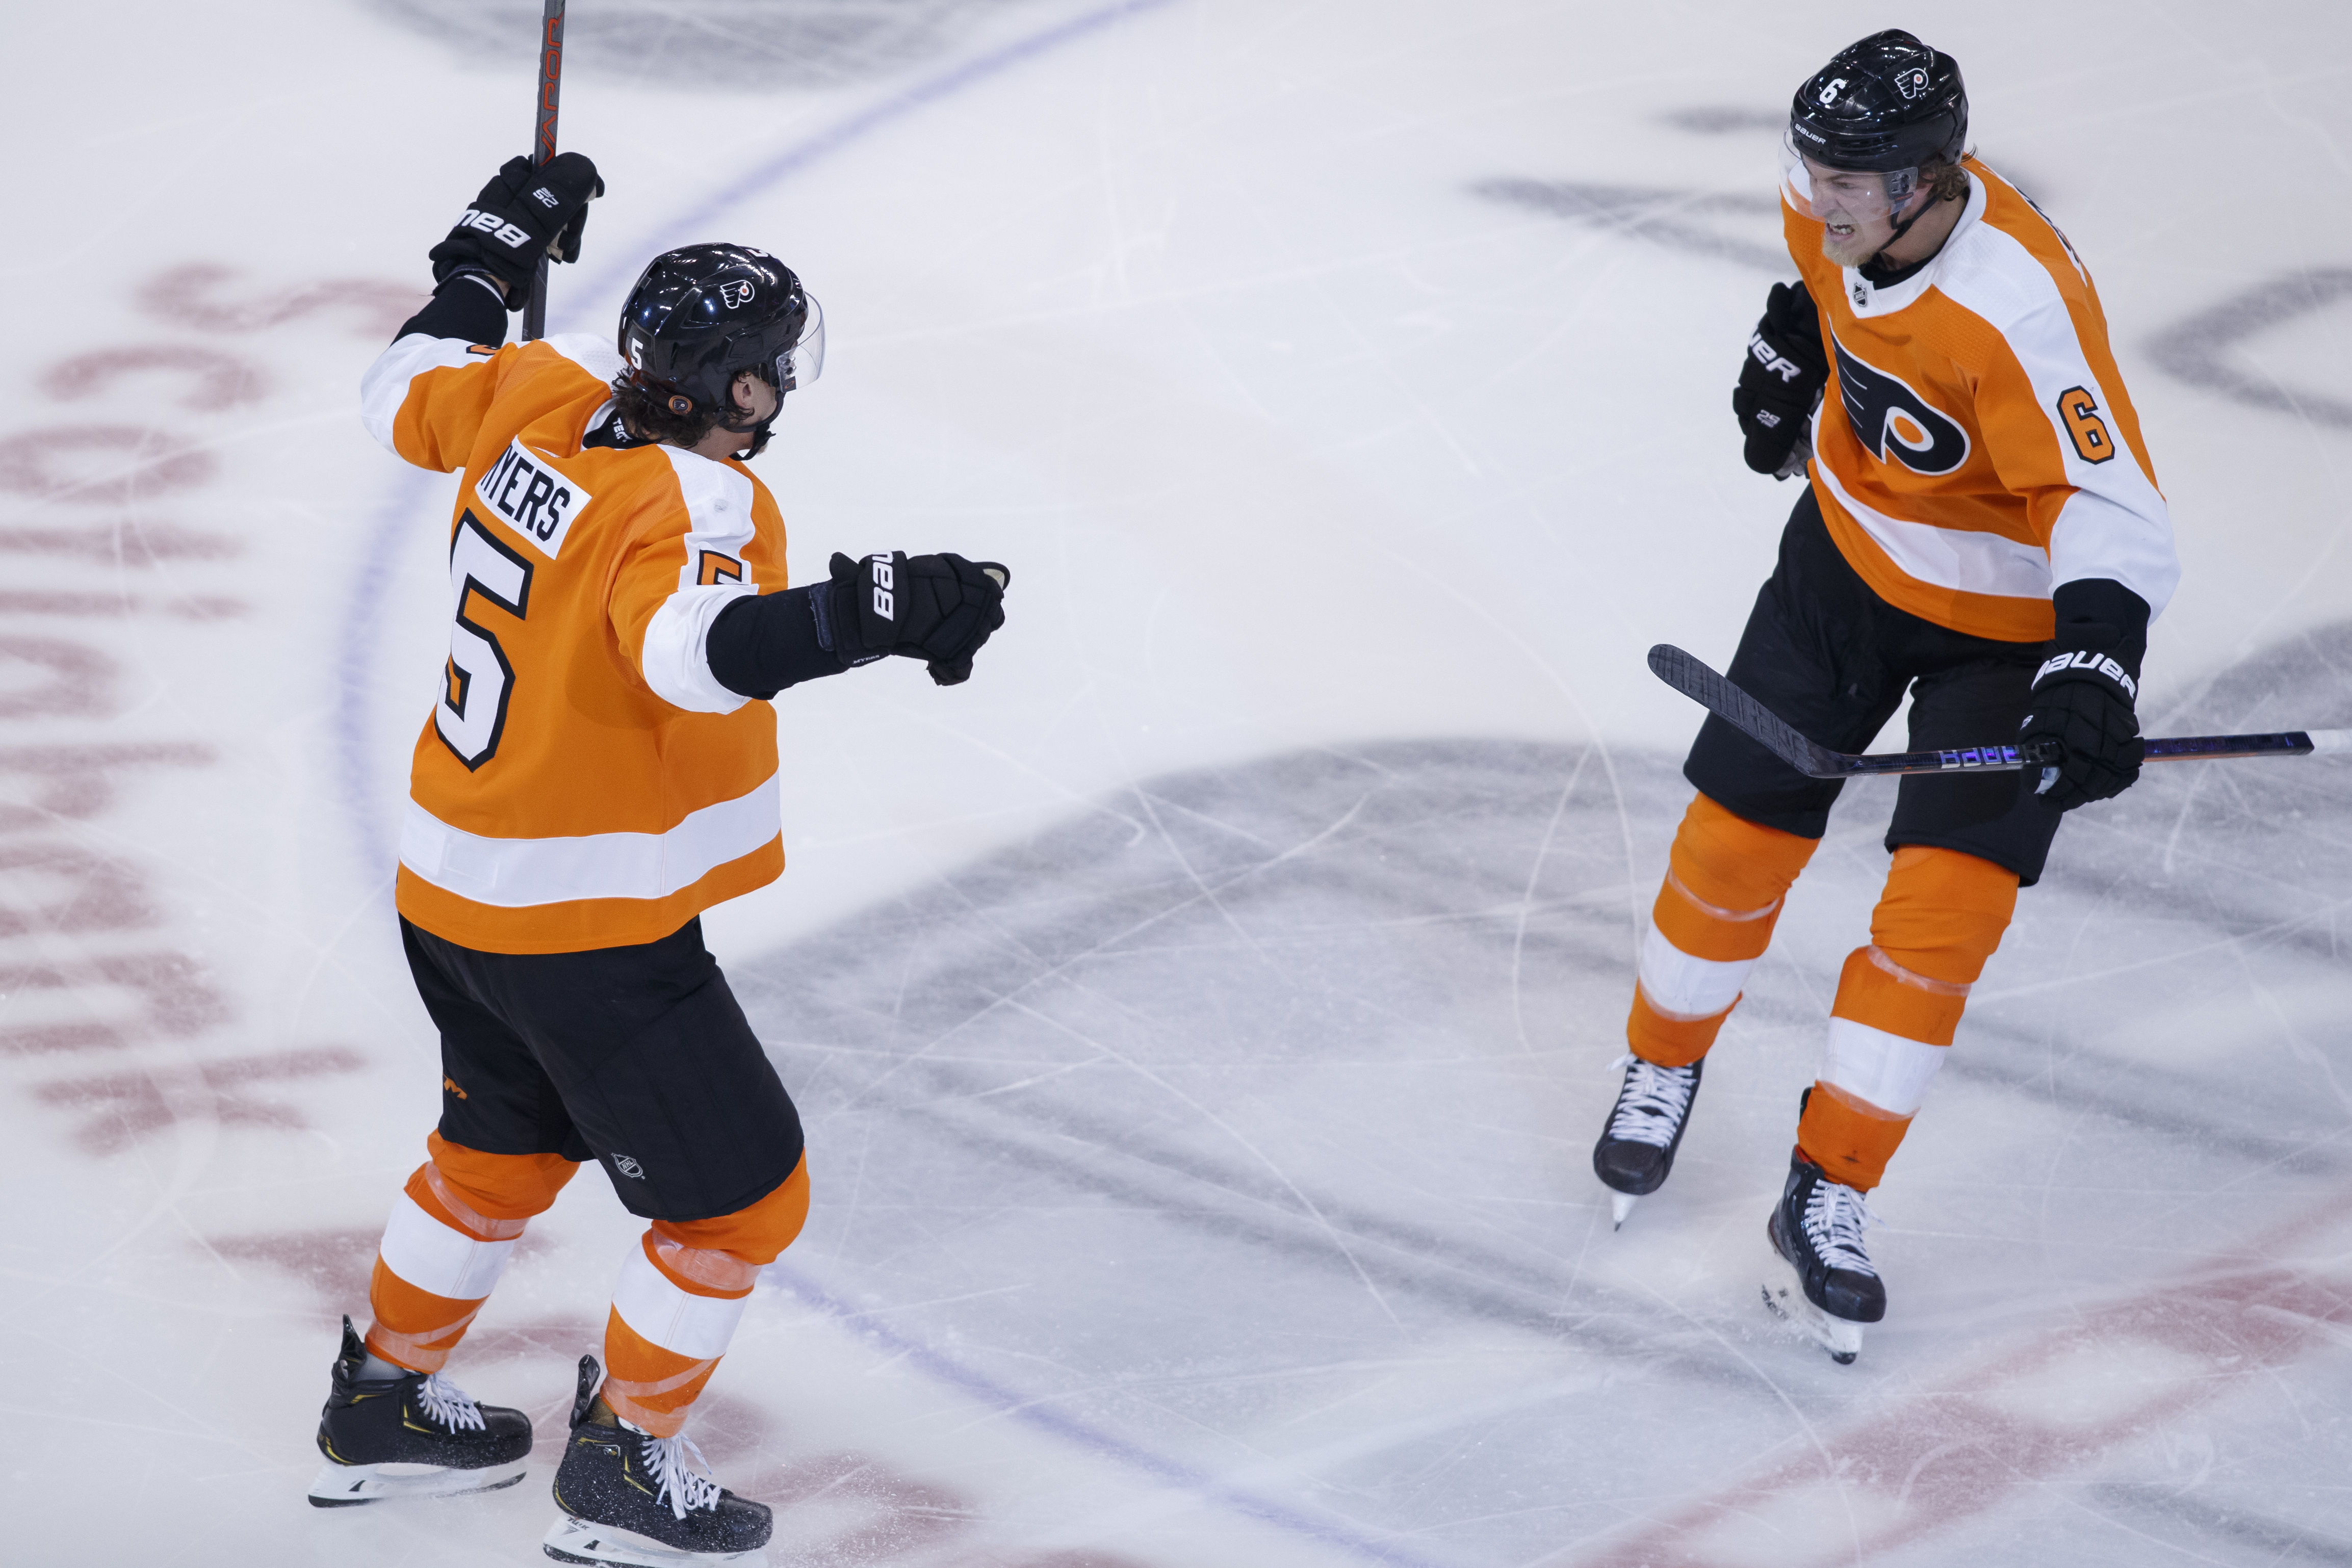 NHL TV Schedule (8/29/20) FREE LIVE STREAMS, times, channels for Saturdays Stanley Cup playoff 2nd round games Islanders-Flyers, Lightning-Bruins